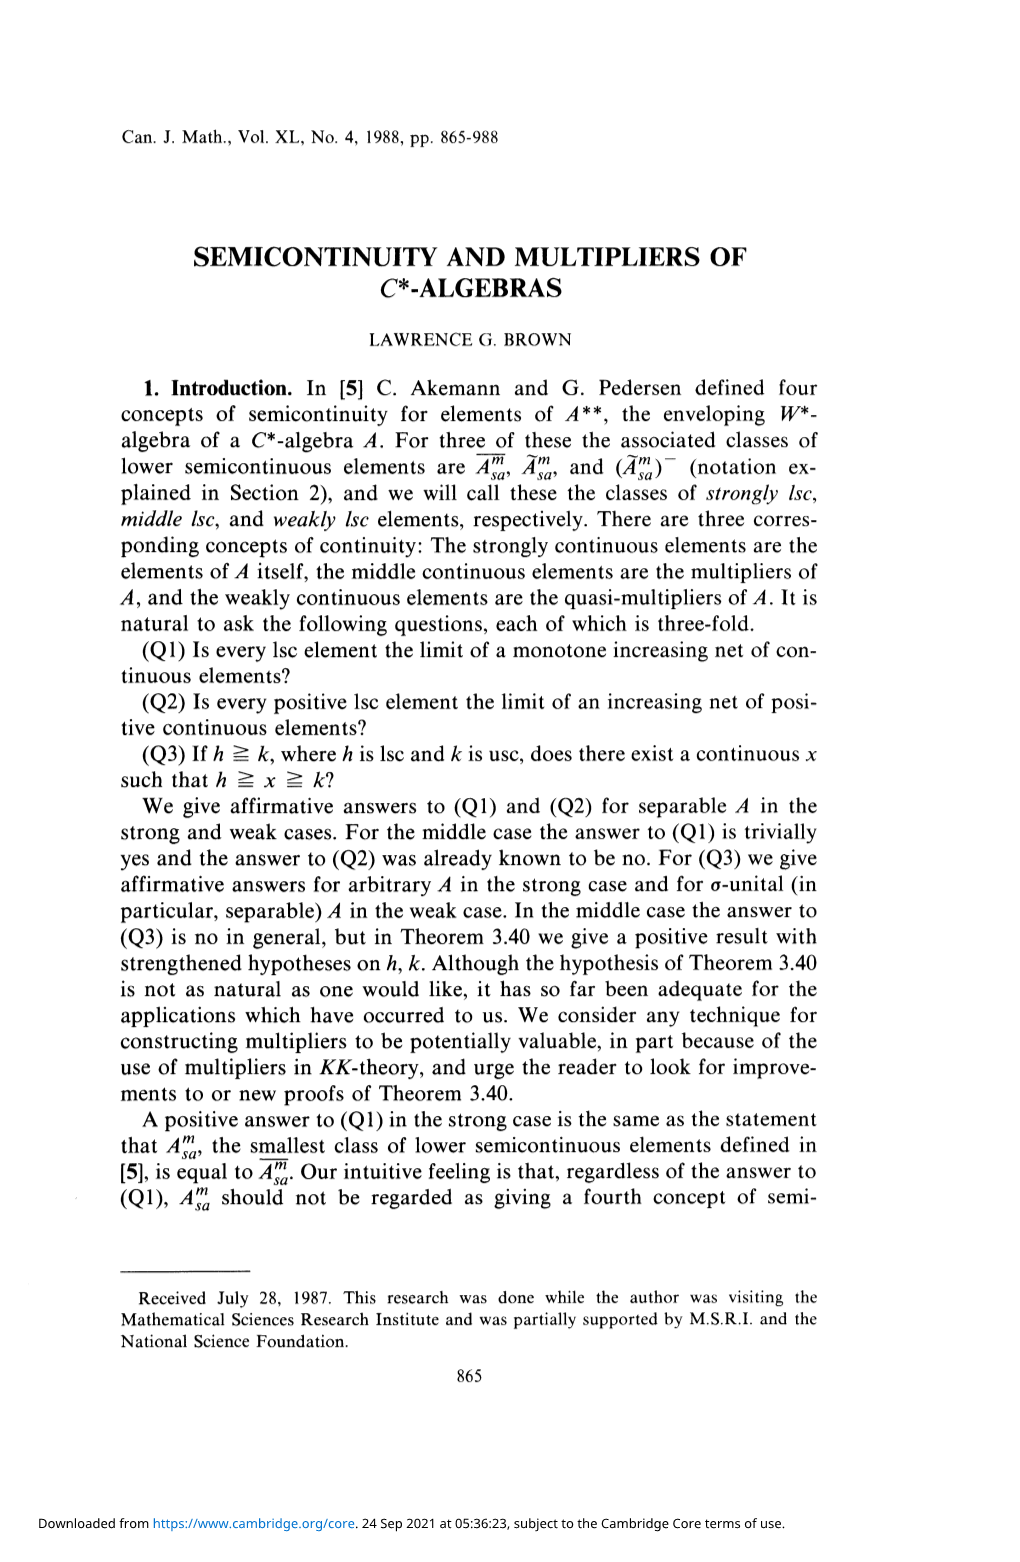 Semicontinuity and Multipliers of C*-Algebras